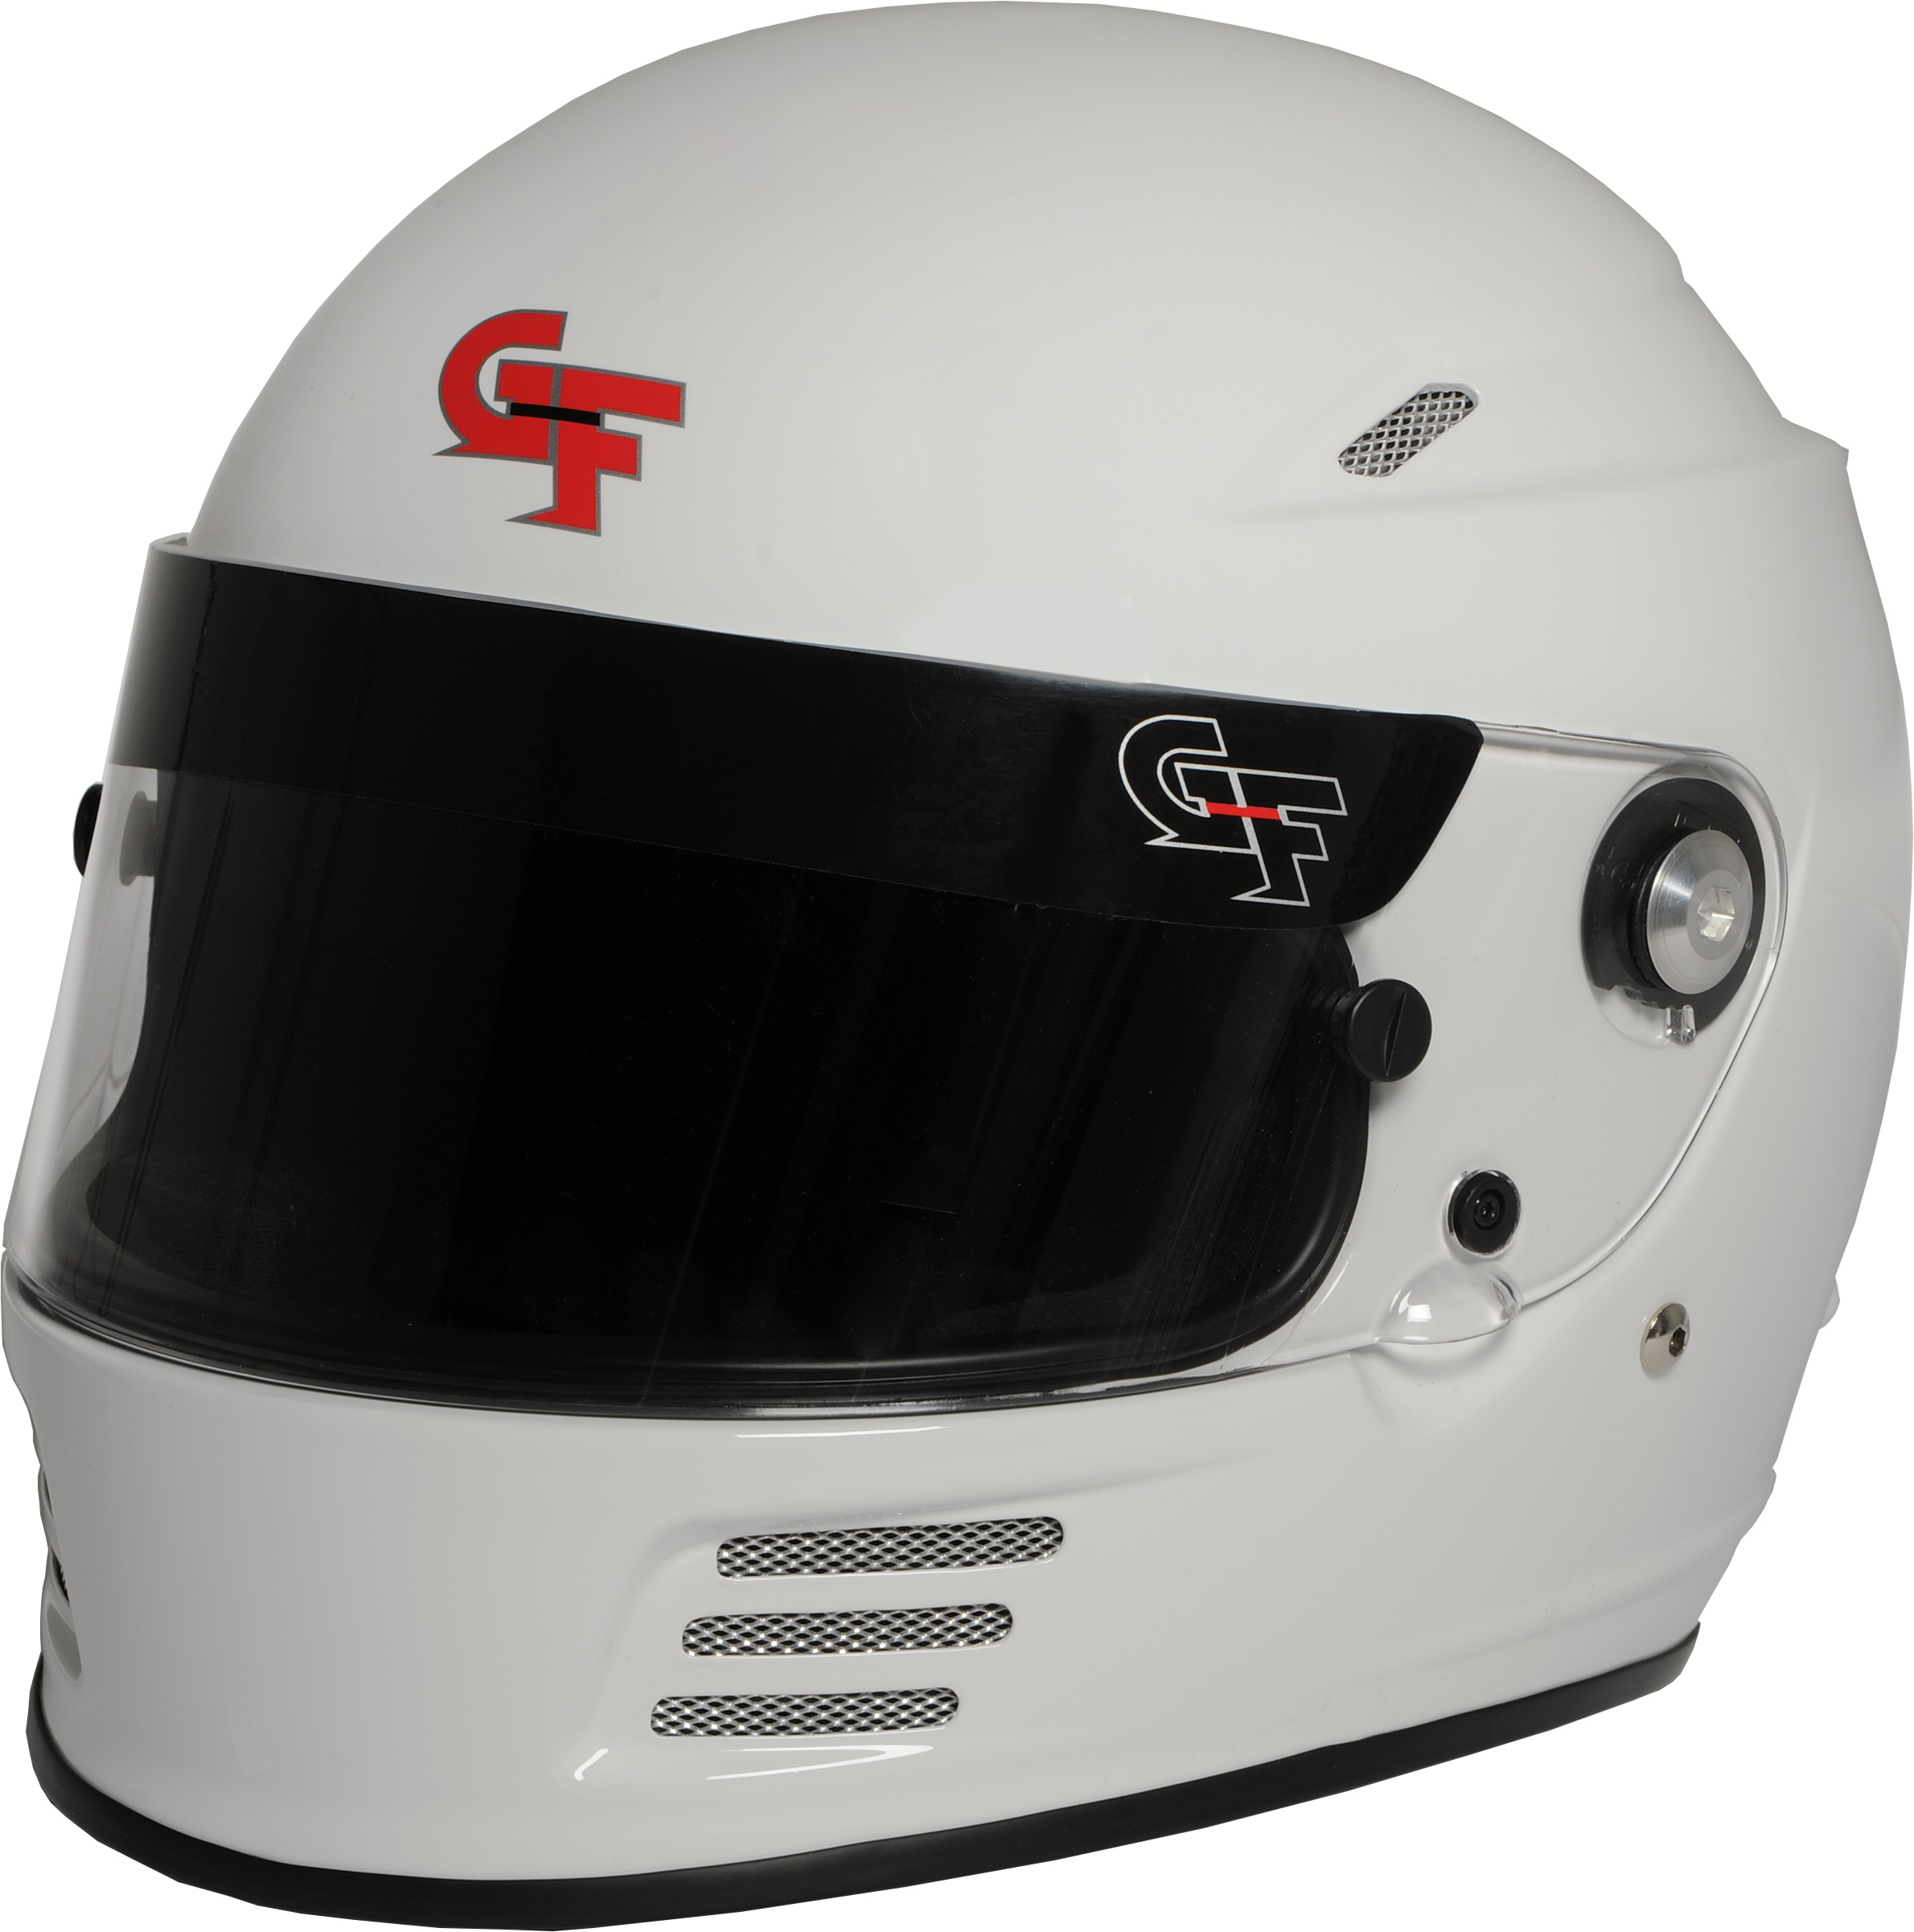 G-Force Racing Gear Helmet, EX9 FULL FACE X-SMALL WHITE SA15